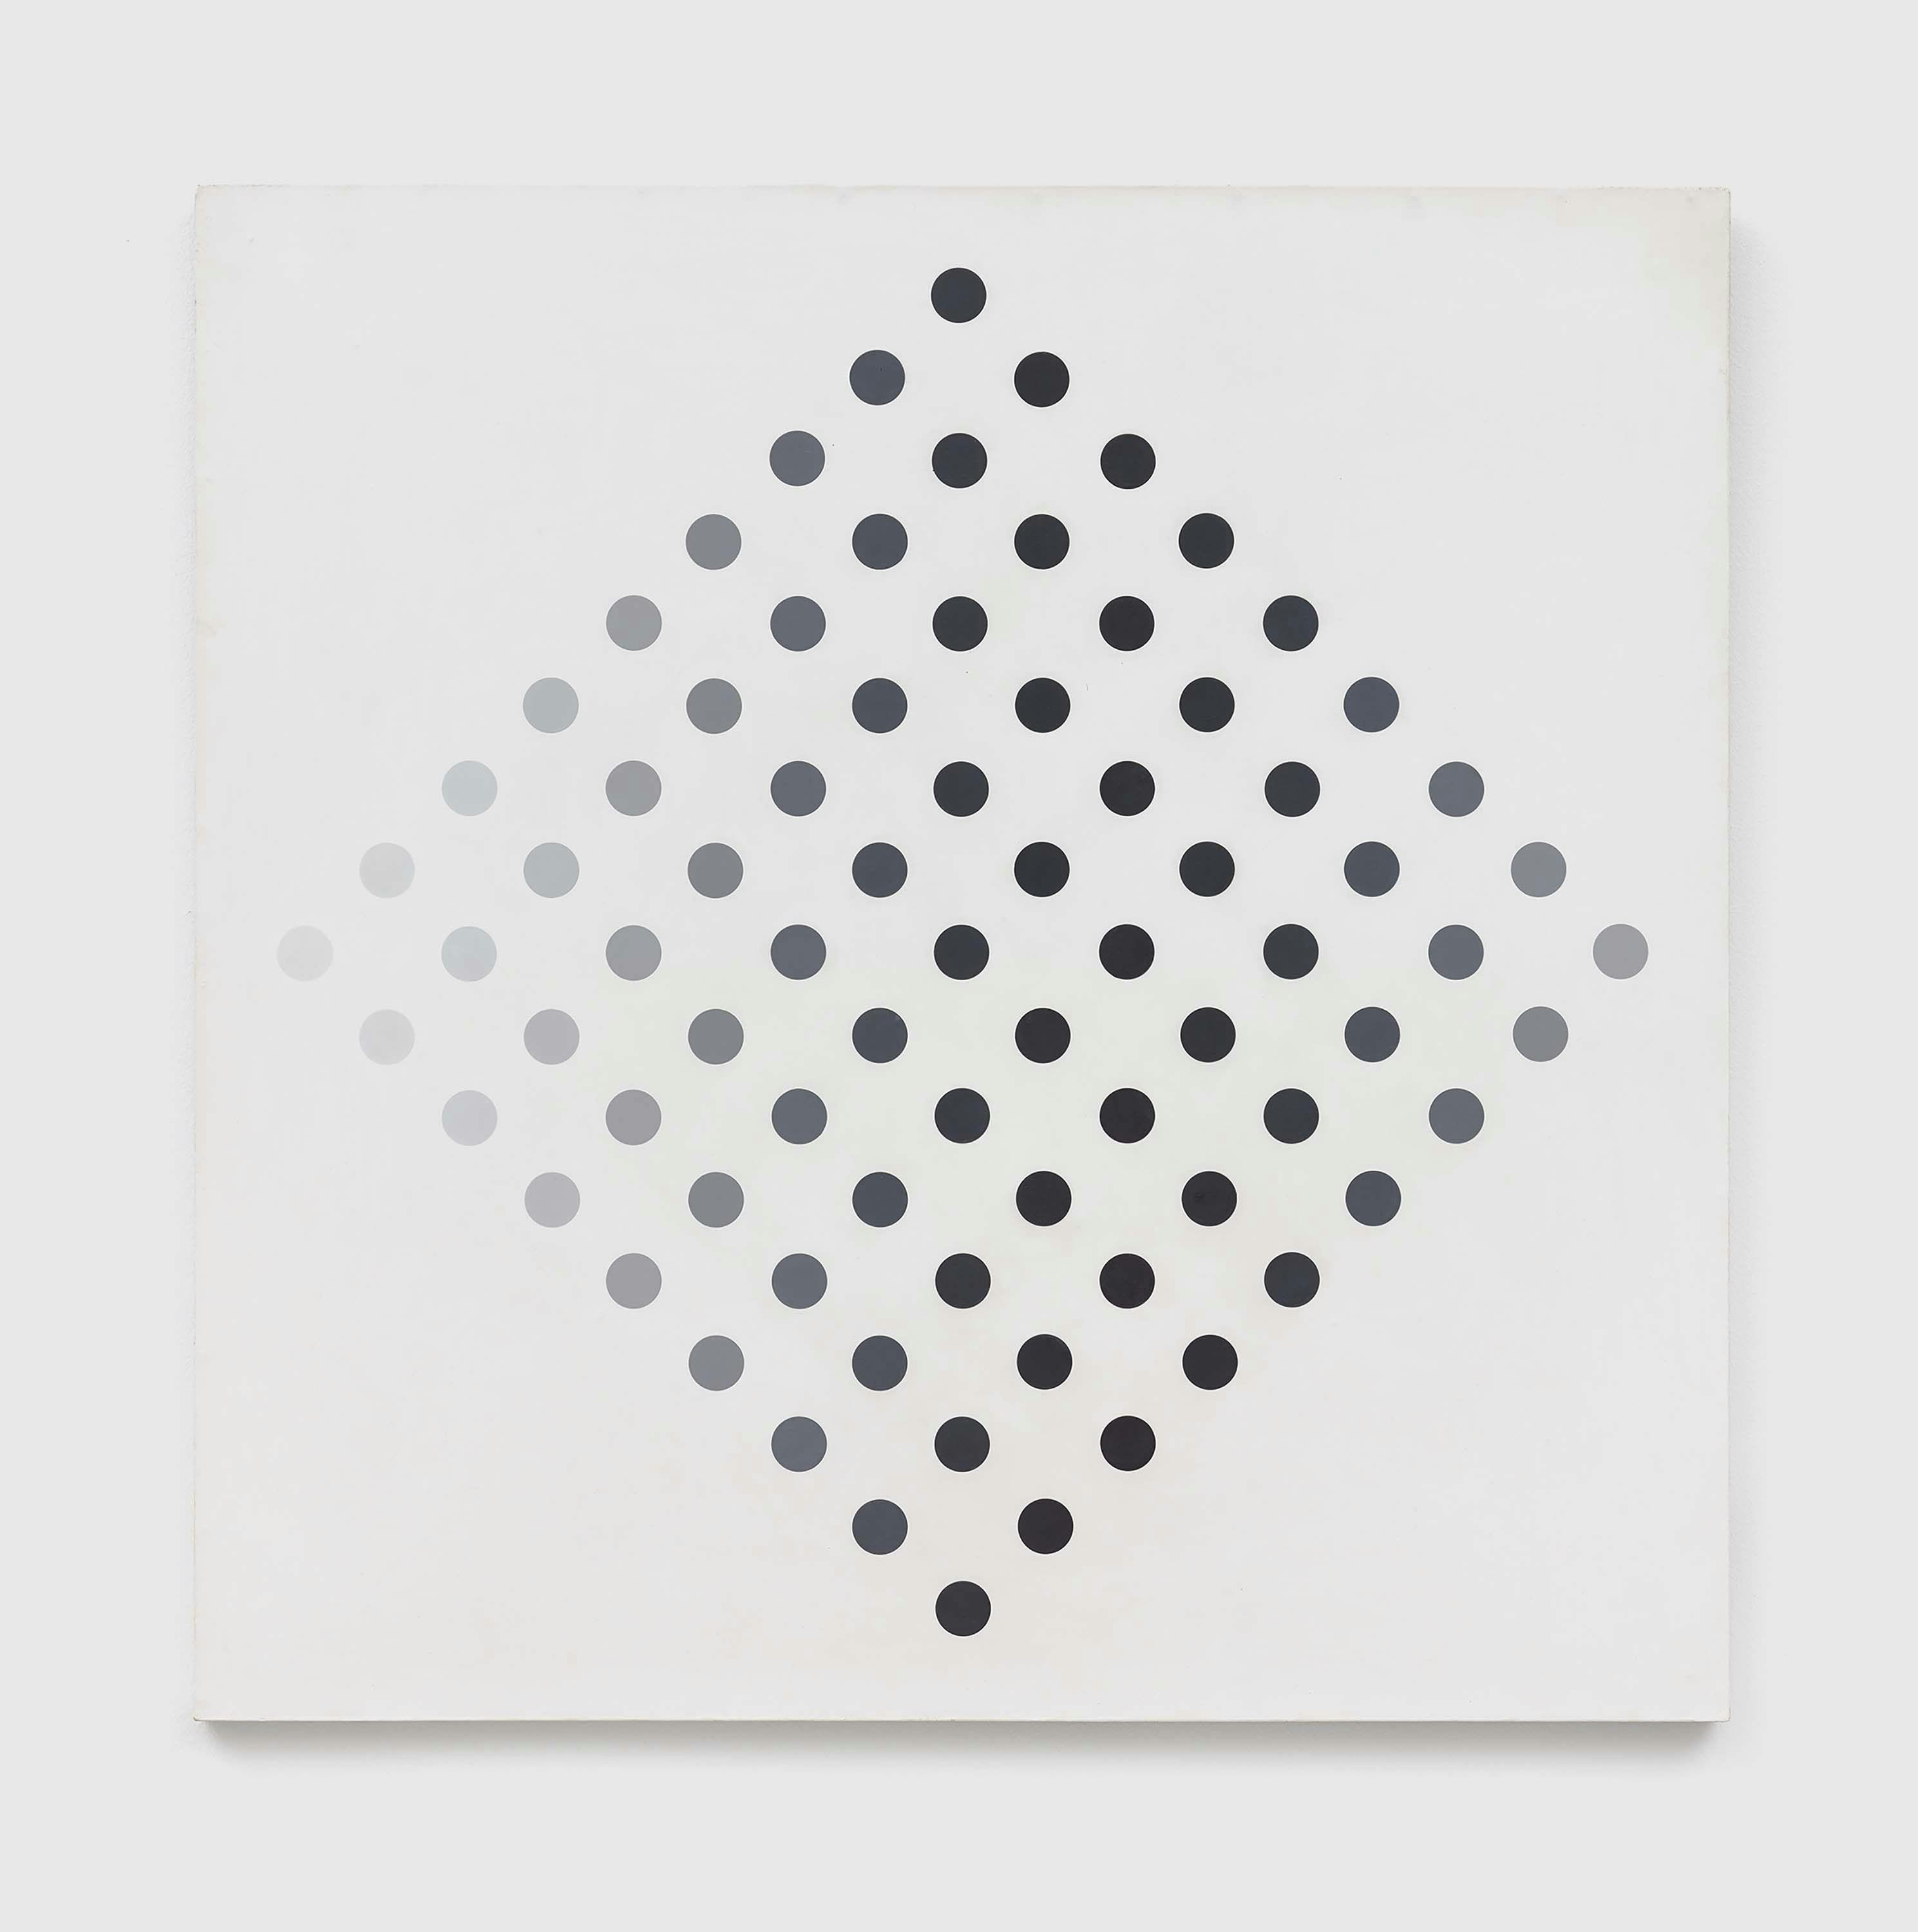 A painting by Bridget Riley, titled Study for Black to White Discs, dated 1961.